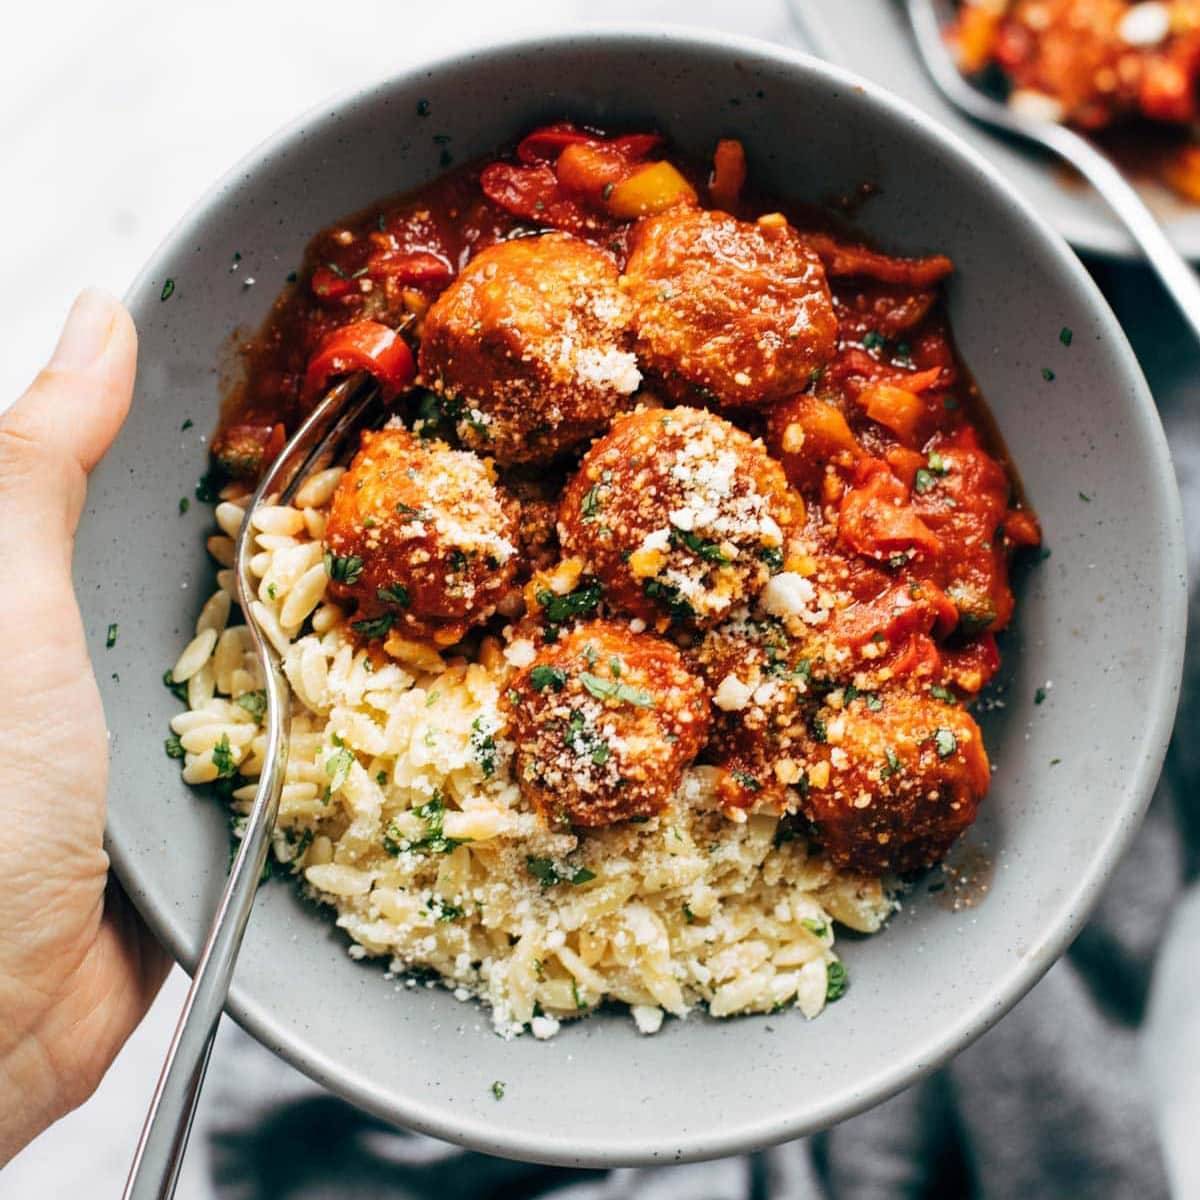 Crispy chicken meatballs, peppers, and orzo in a bowl with fork.